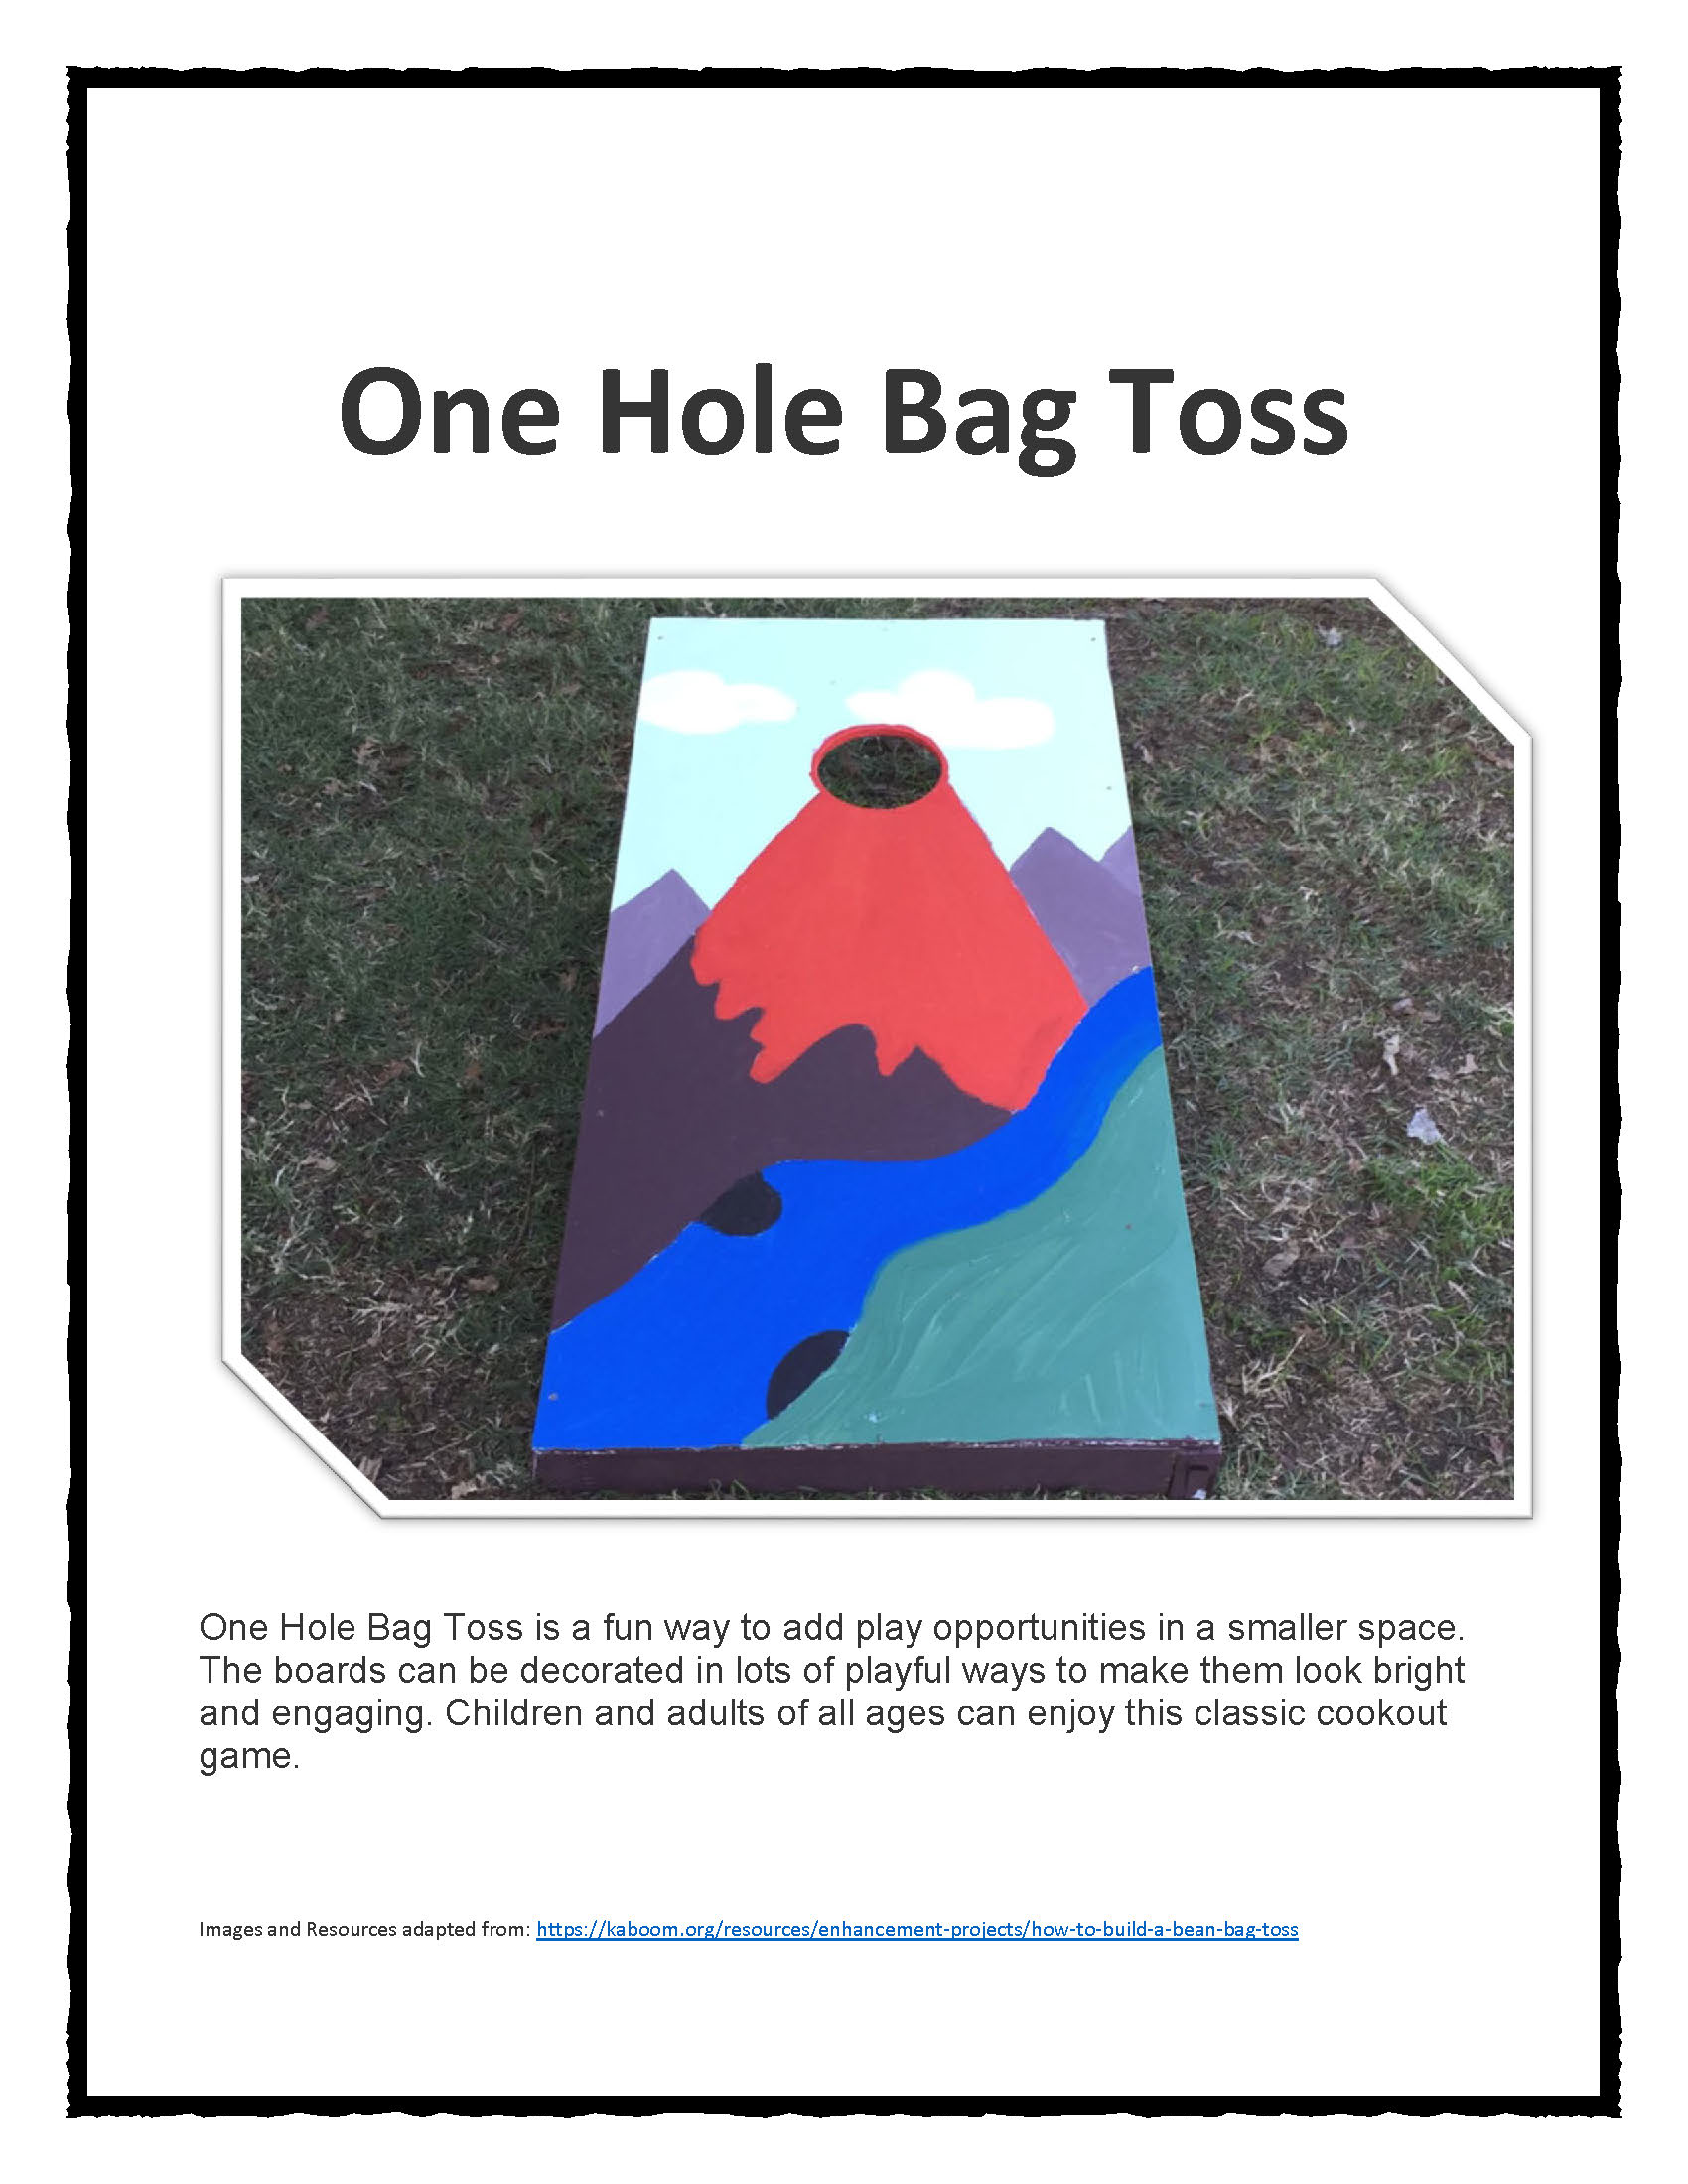 Click here to open the One Hole Bag Toss PDF in English.